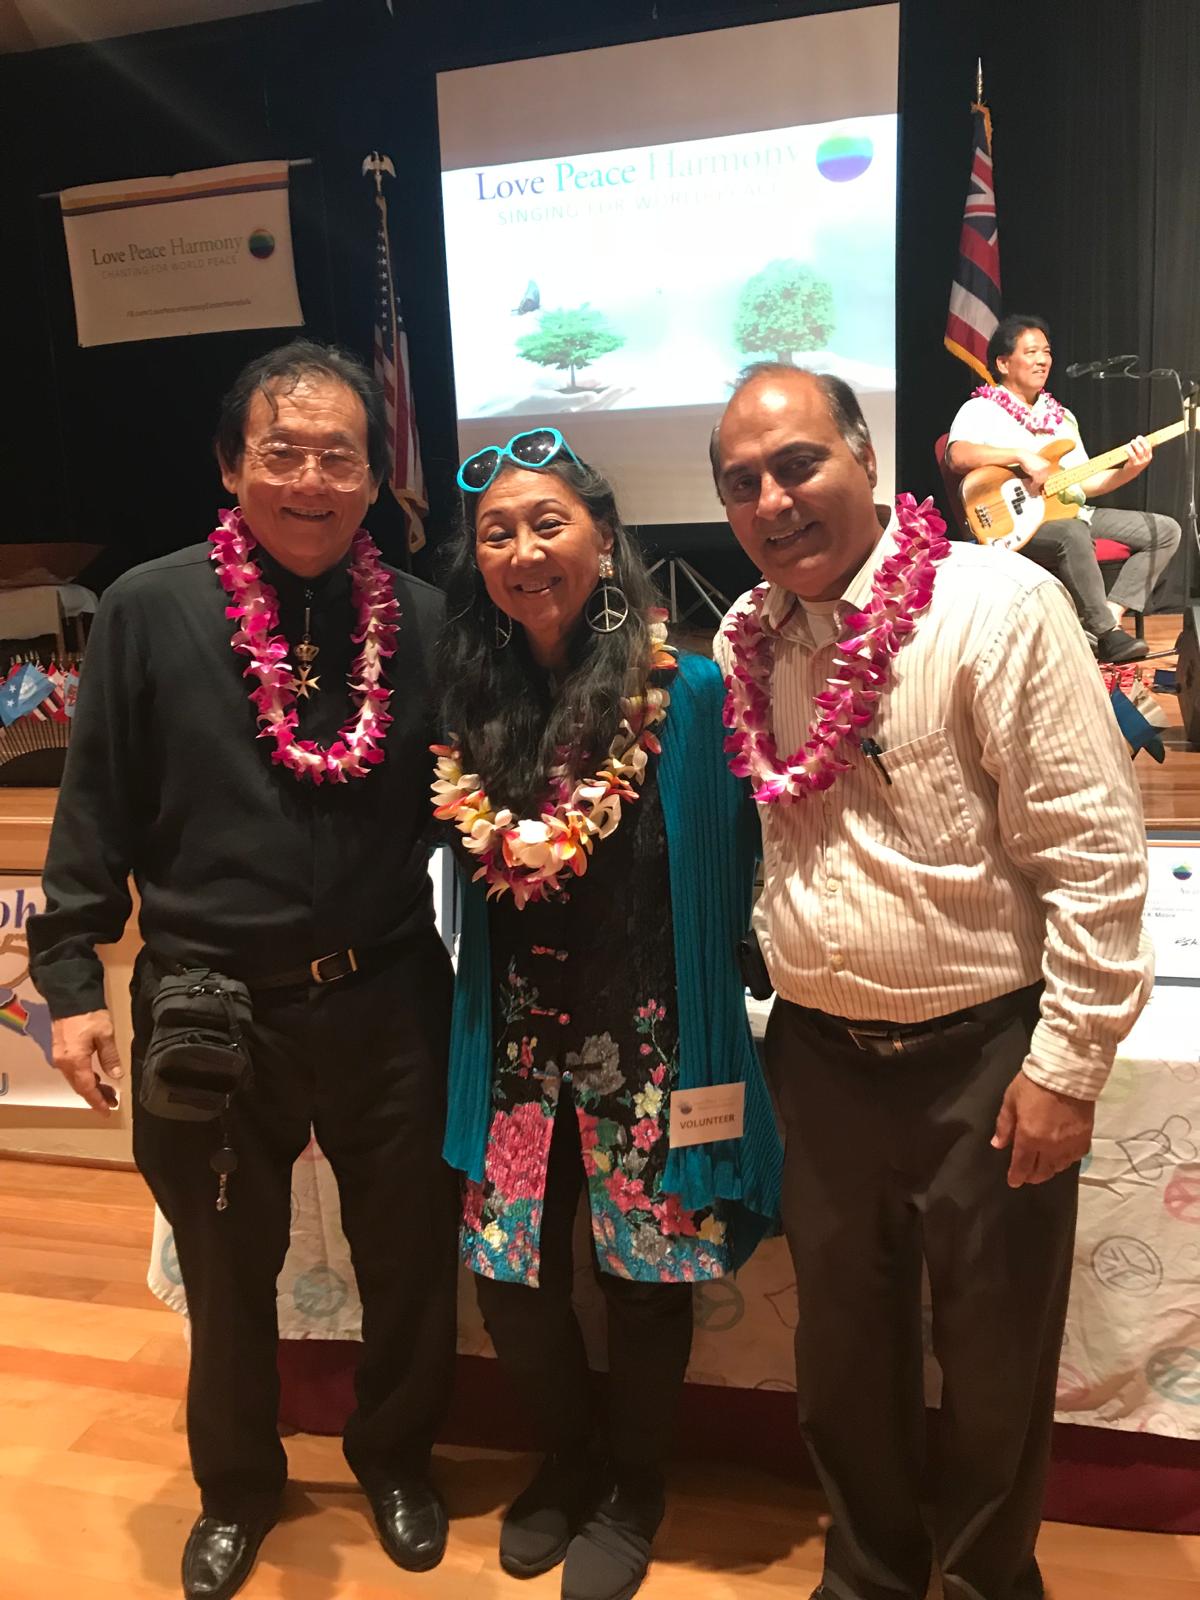 GIIP members met with Dr. and Hon. Lt. Governor, Josh Green, State of Hawaii in Honolulu.  